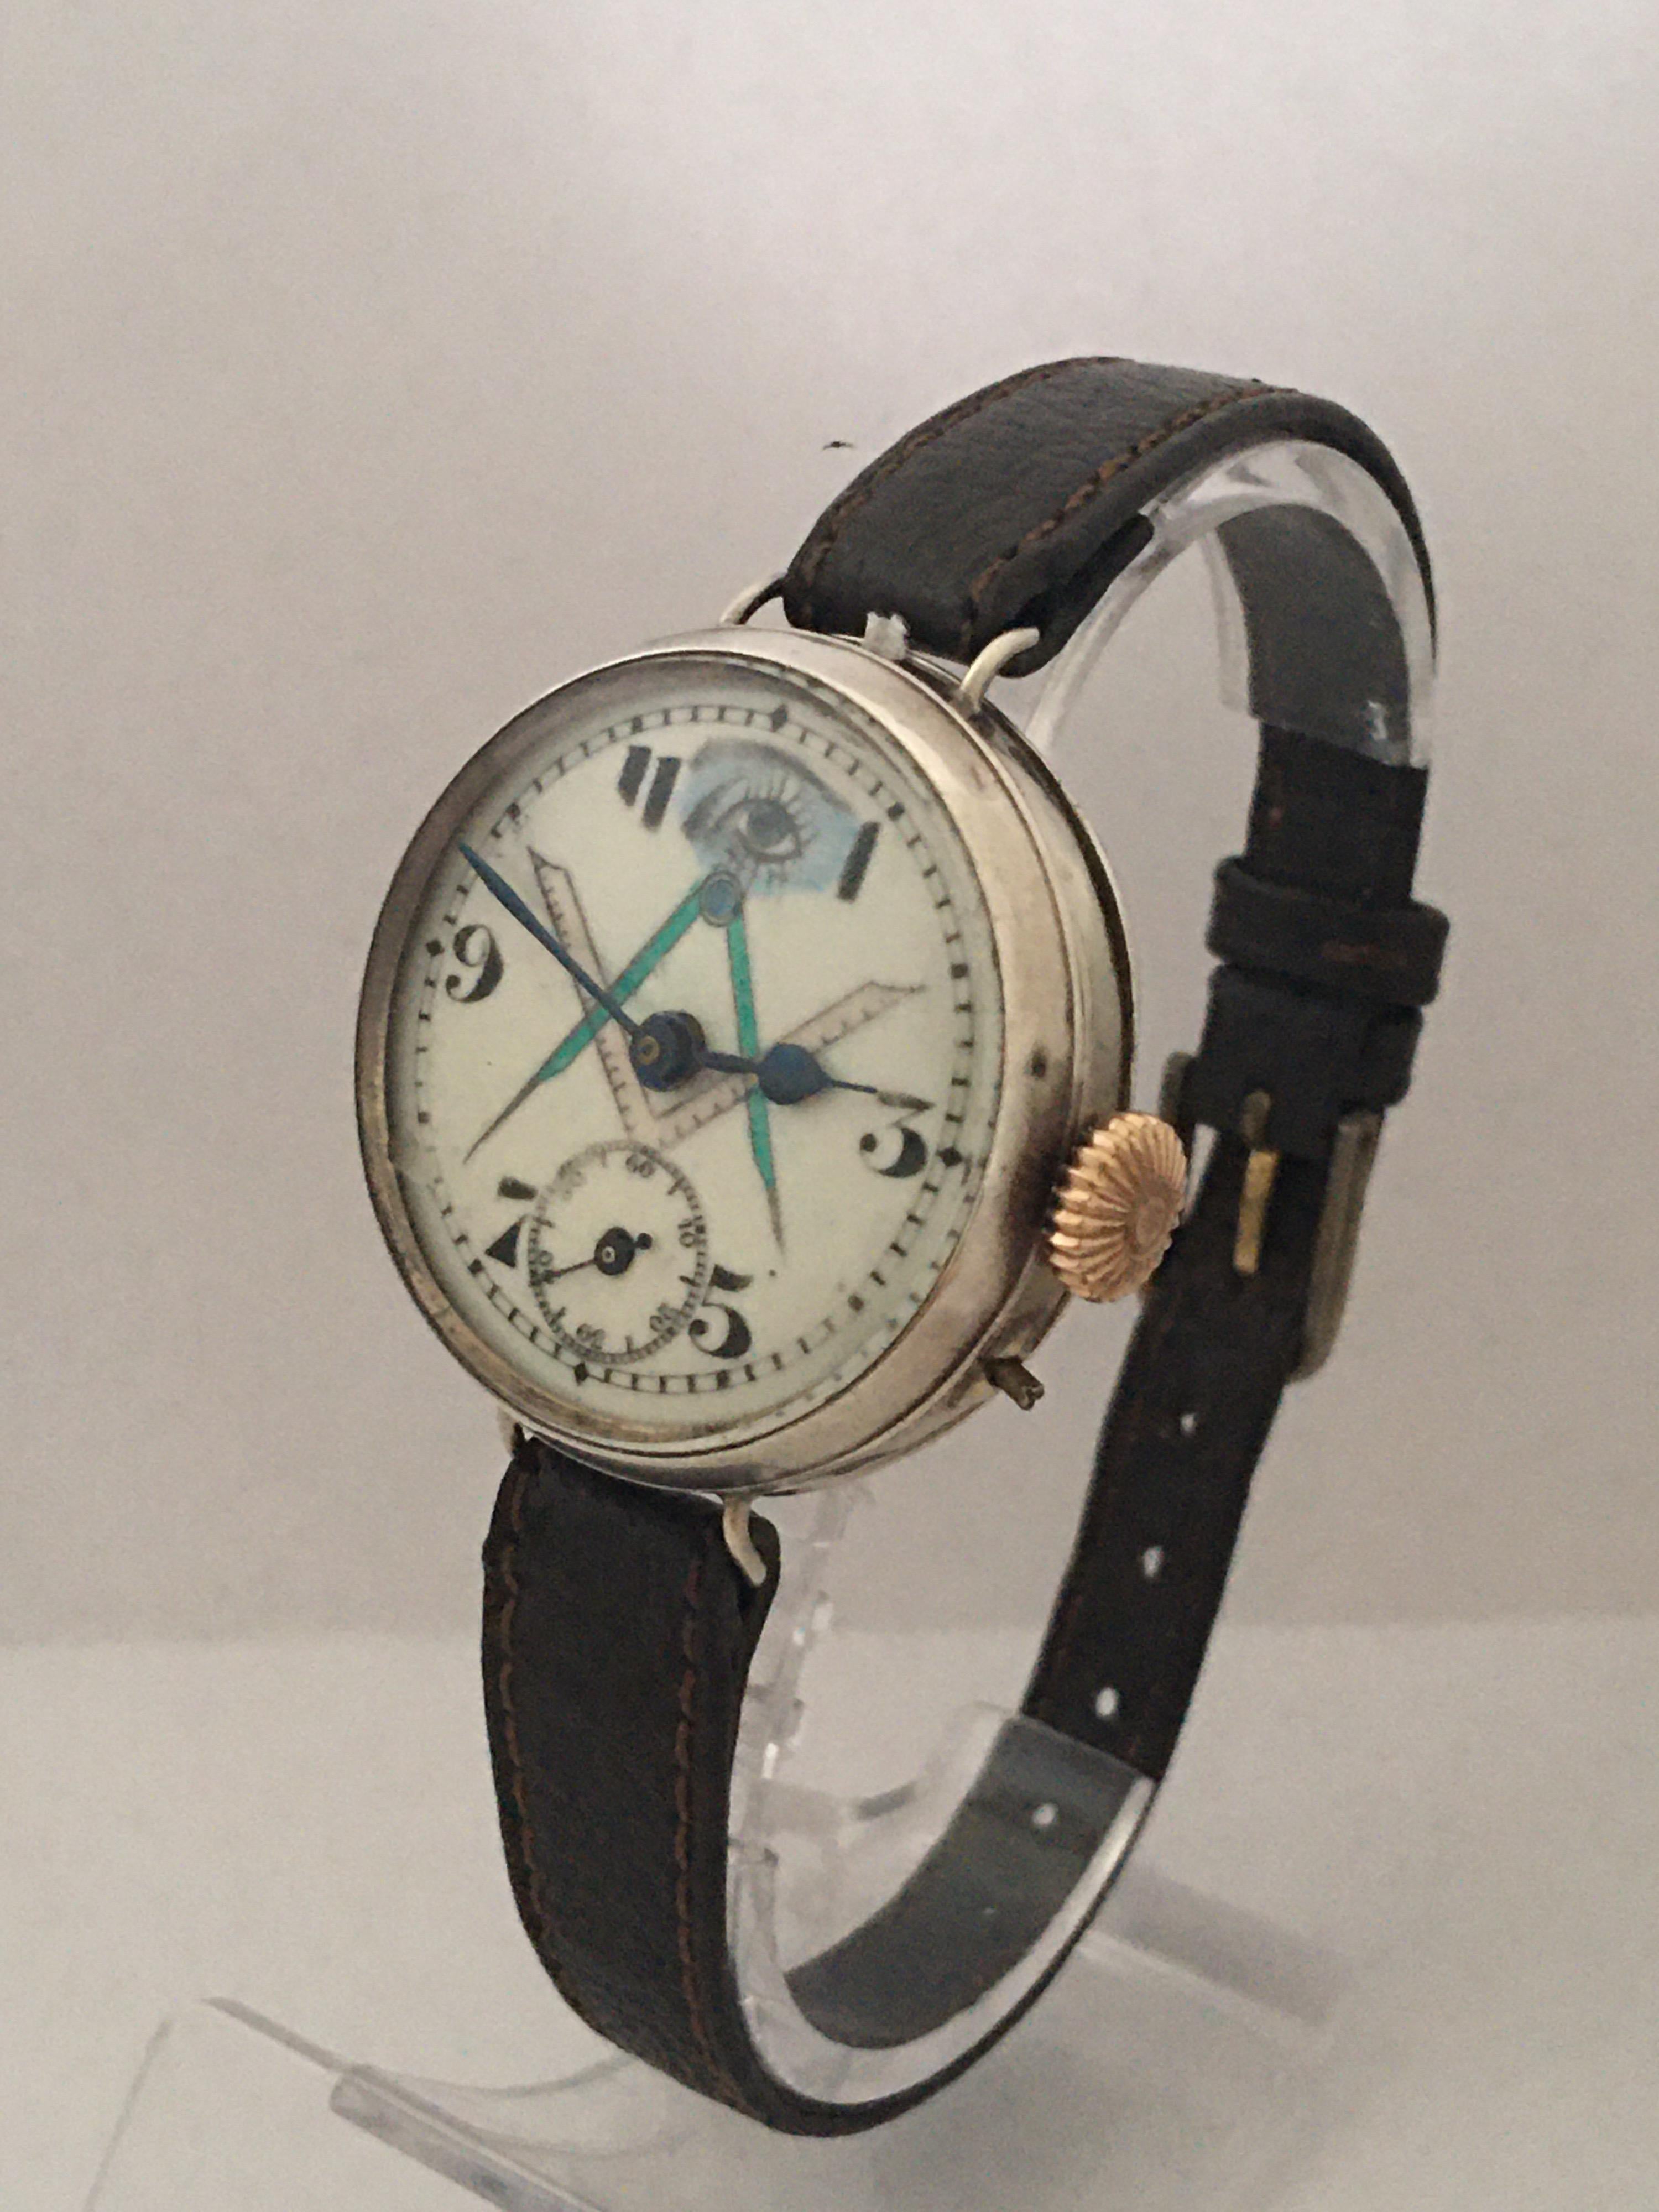 This Beautiful &  Rare Pre-owned Manual winding pin set Masonic Trench Watch is working and it is ticking well. 

Visible signs of wearing which has some slight scratches and minor dents on the watch case as shown and the strap is worn. 

Please